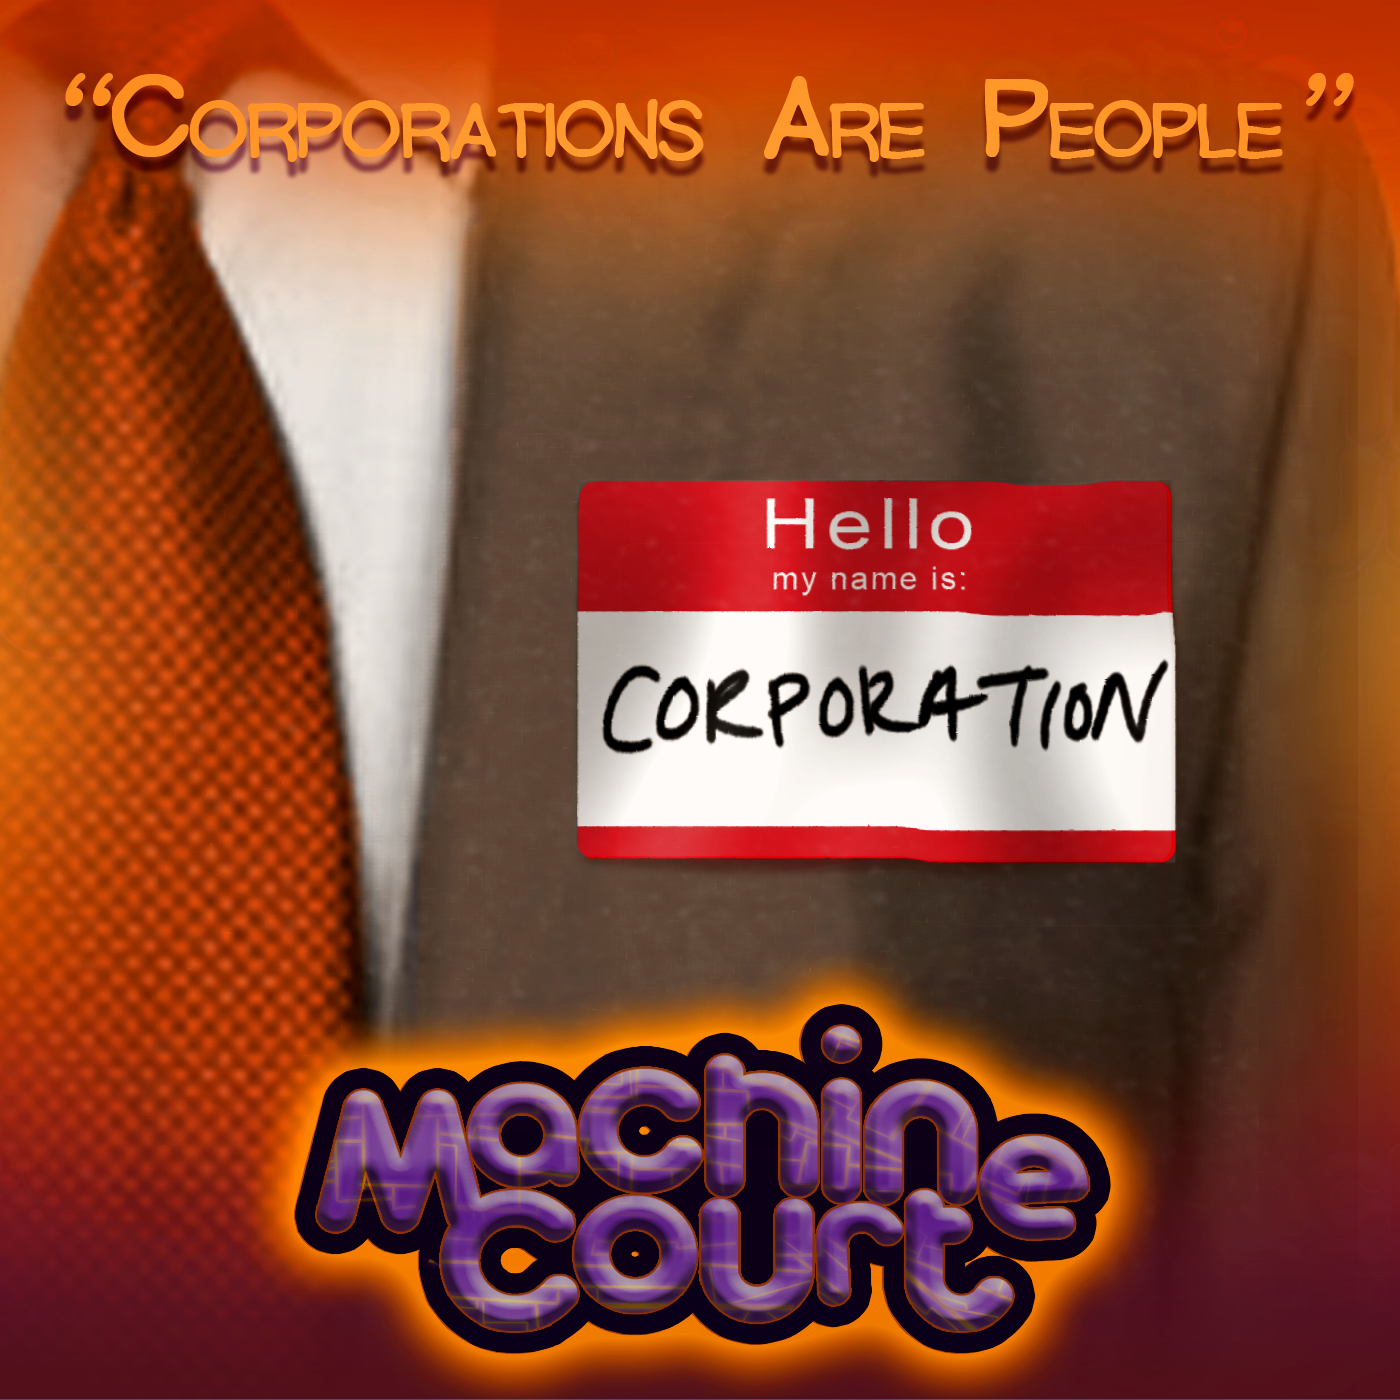 2.11 “Corporations are People”